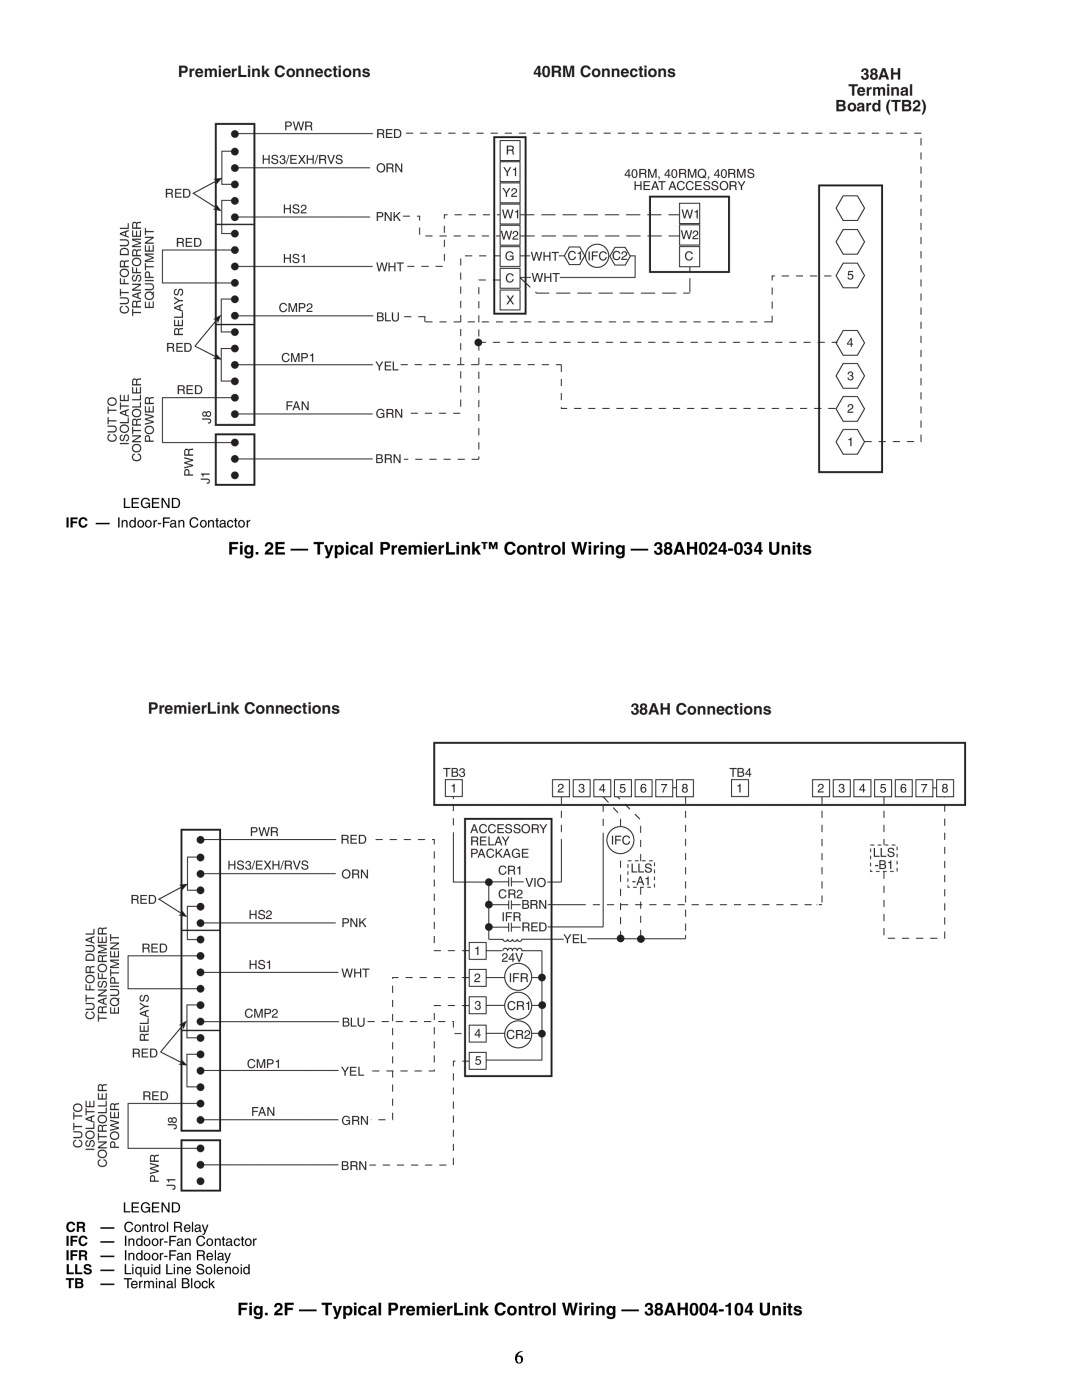 Carrier 33CSPREMLK specifications PremierLink Connections, 40RM Connections, 38AH Terminal Board TB2, 38AH Connections 